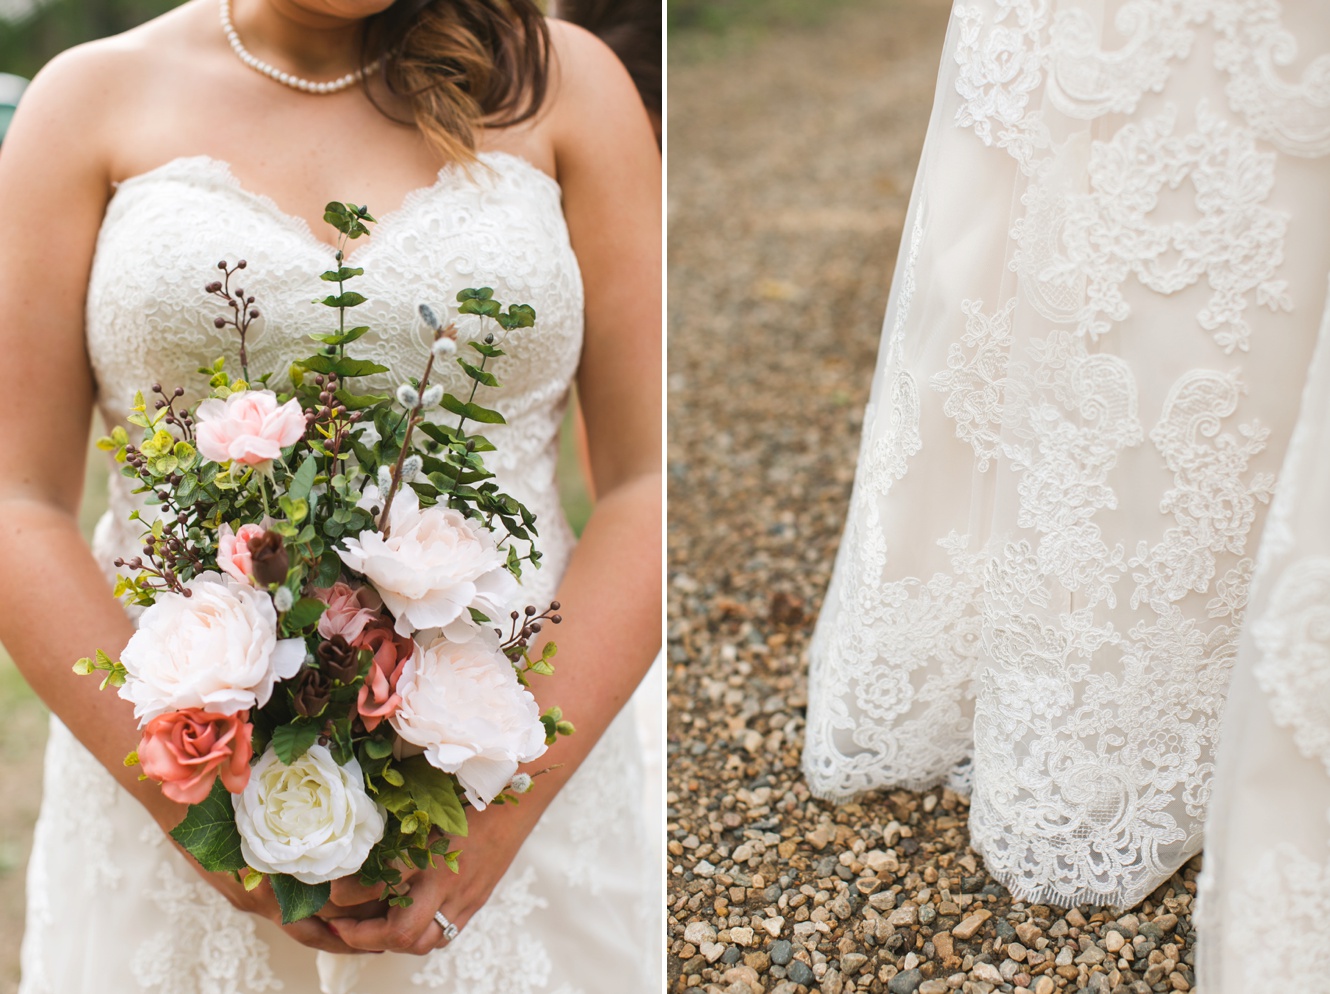 Handmade wedding bouquet and lace photo